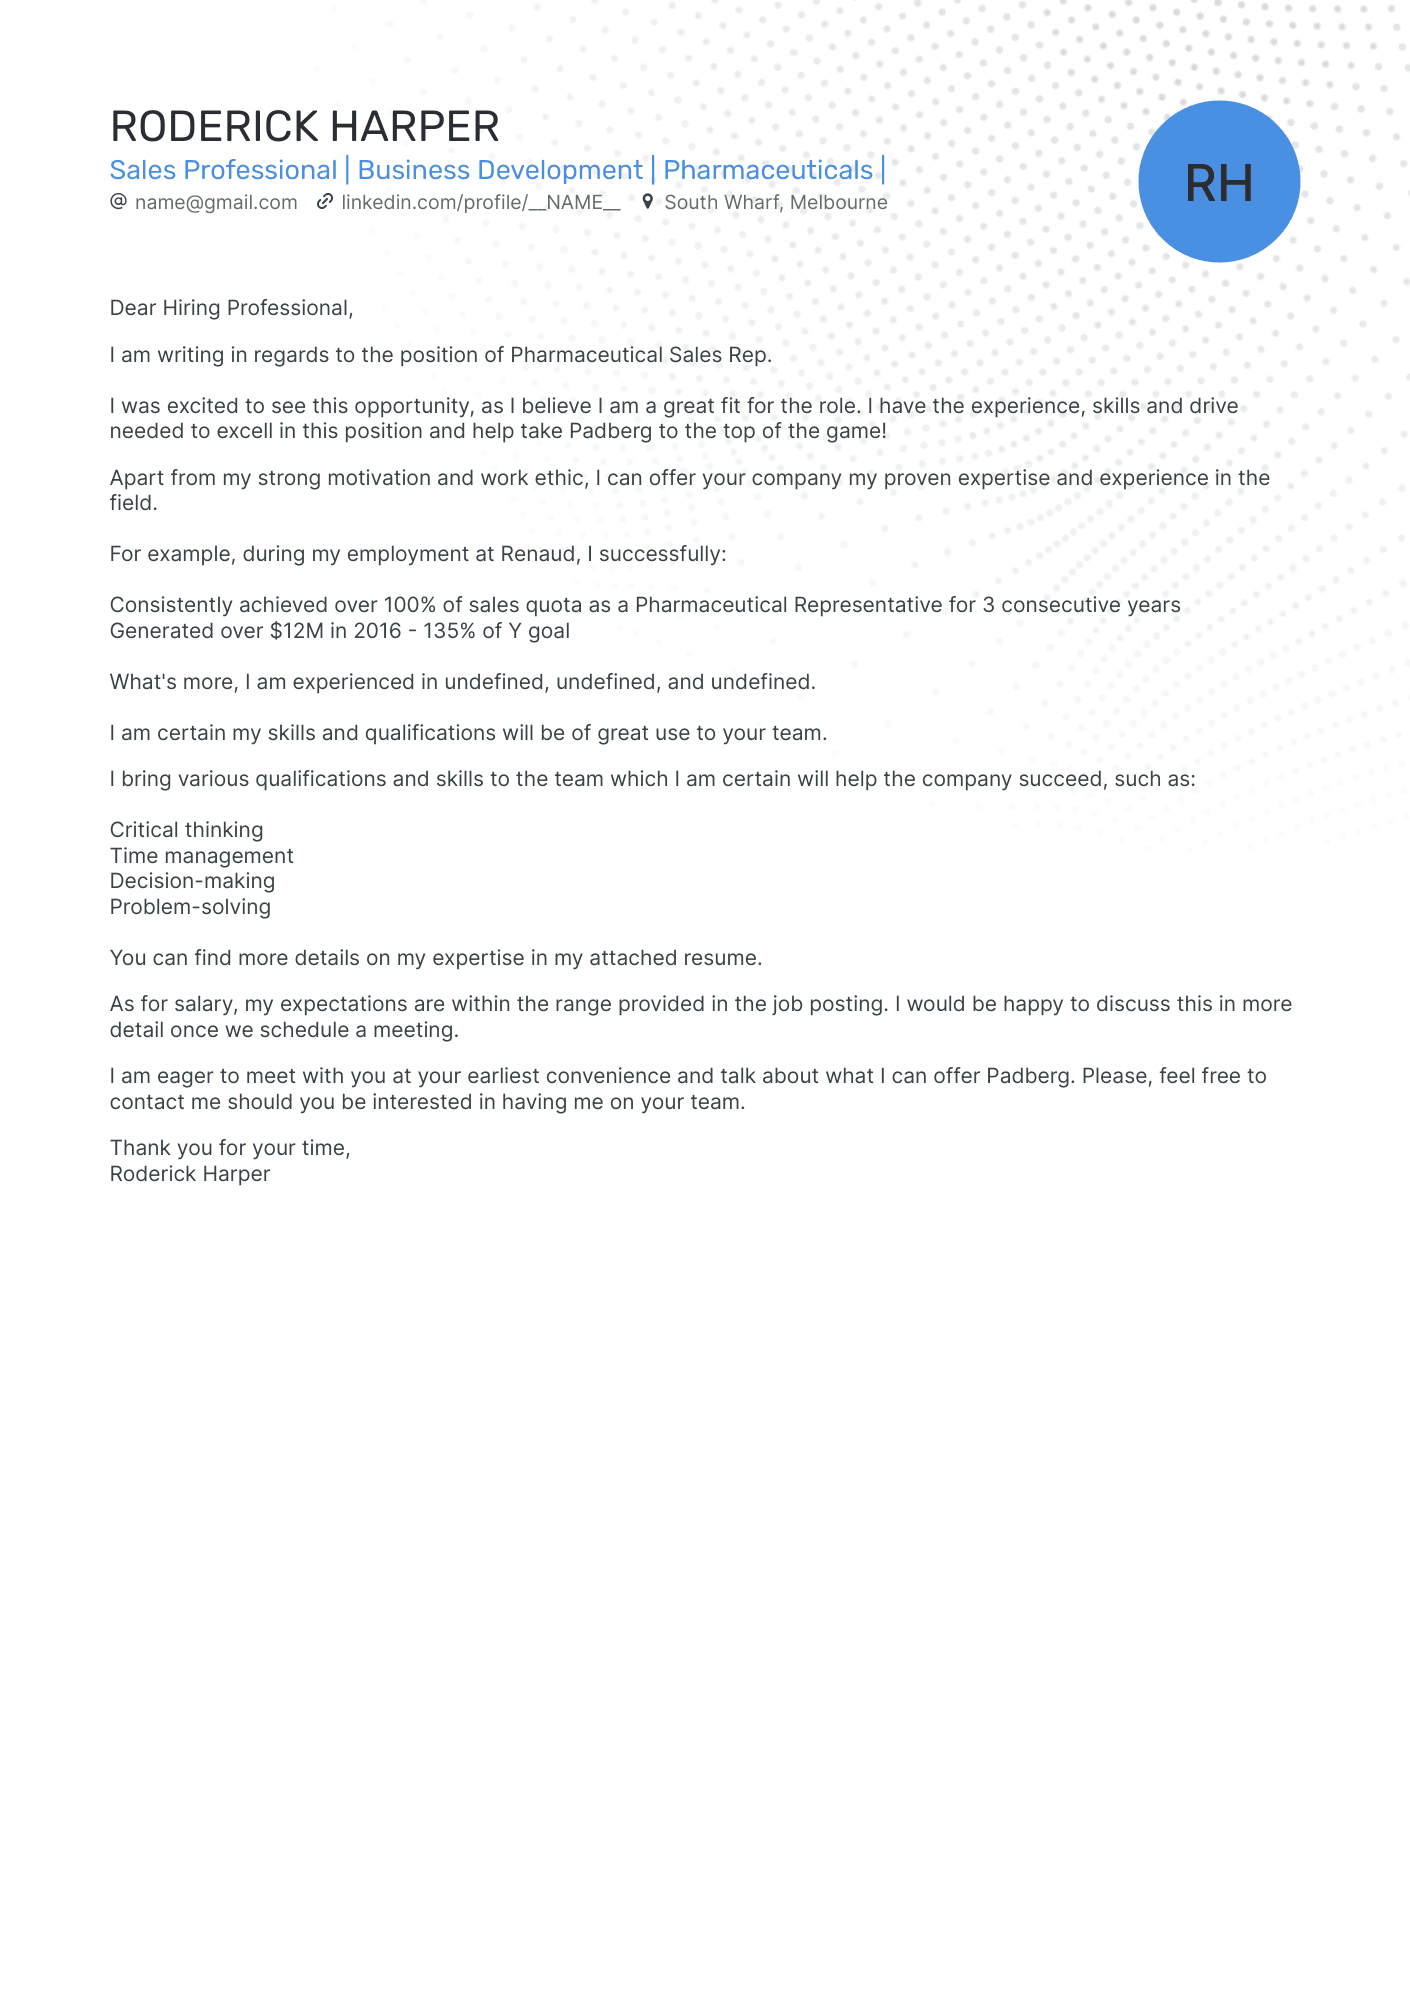 Pharmaceutical Sales Rep cover letter